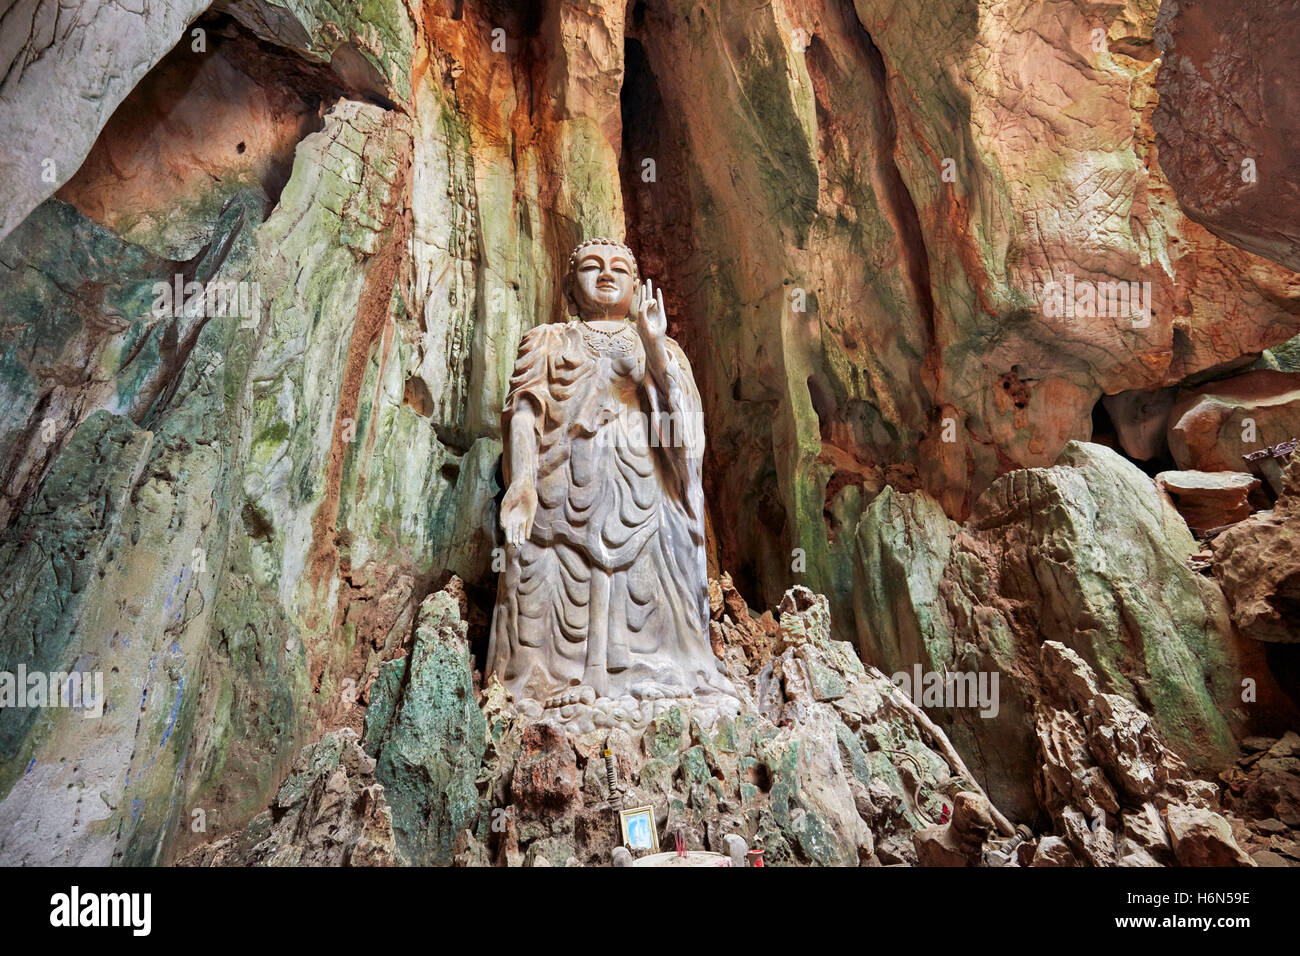 The Upright Buddha statue in Tang Chon Cave. Thuy Son Mountain, The Marble Mountains, Da Nang, Vietnam. Stock Photo